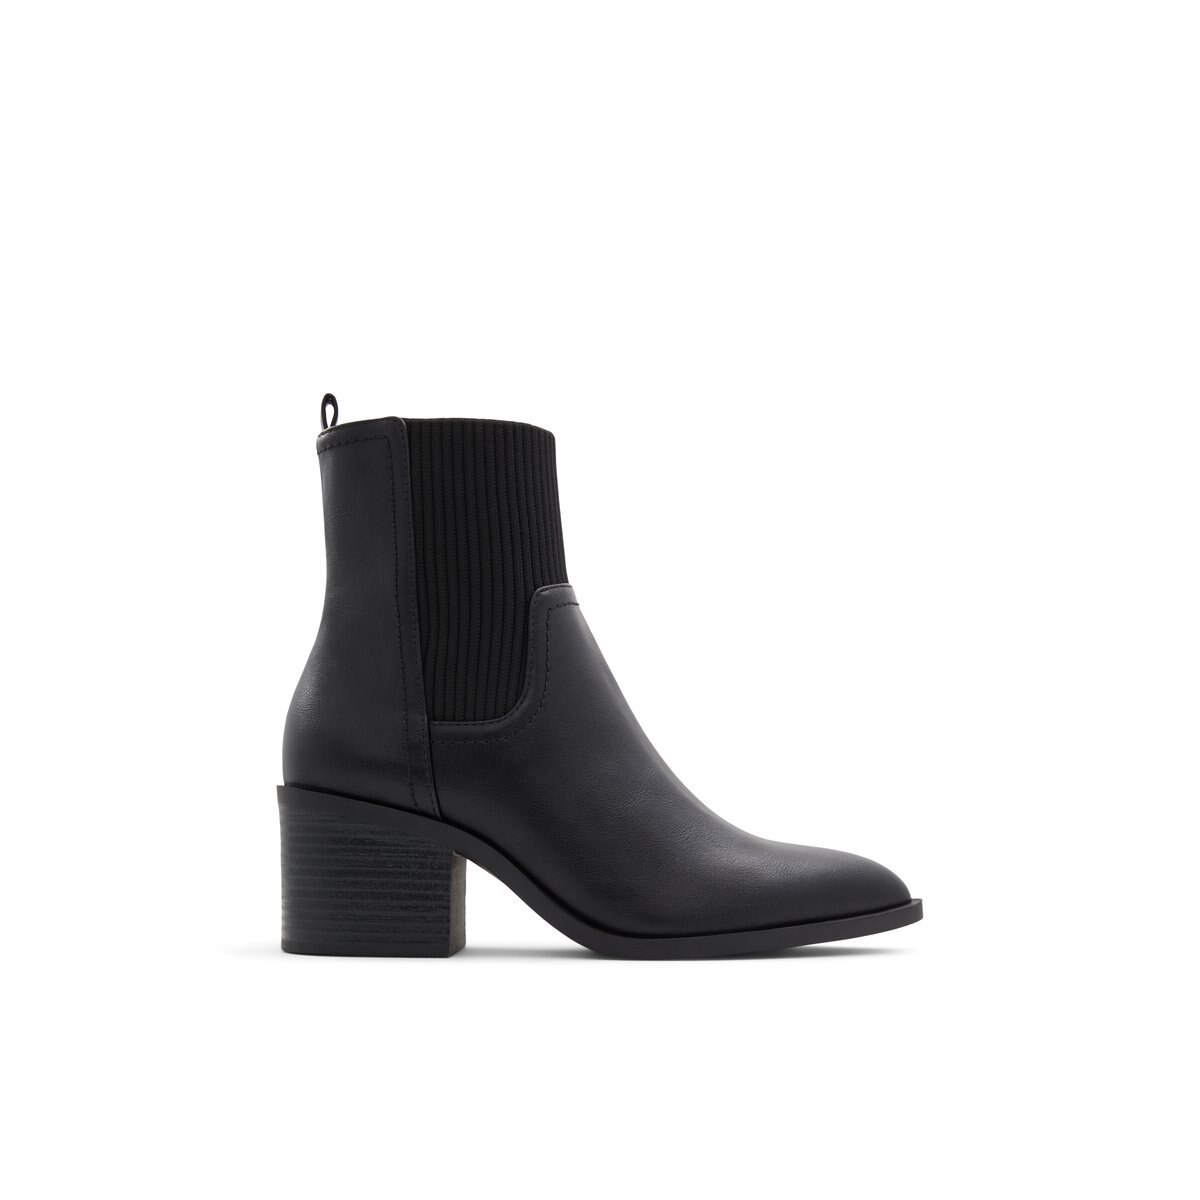 Charliize Black Women's Ankle Boots | Call It Spring Canada